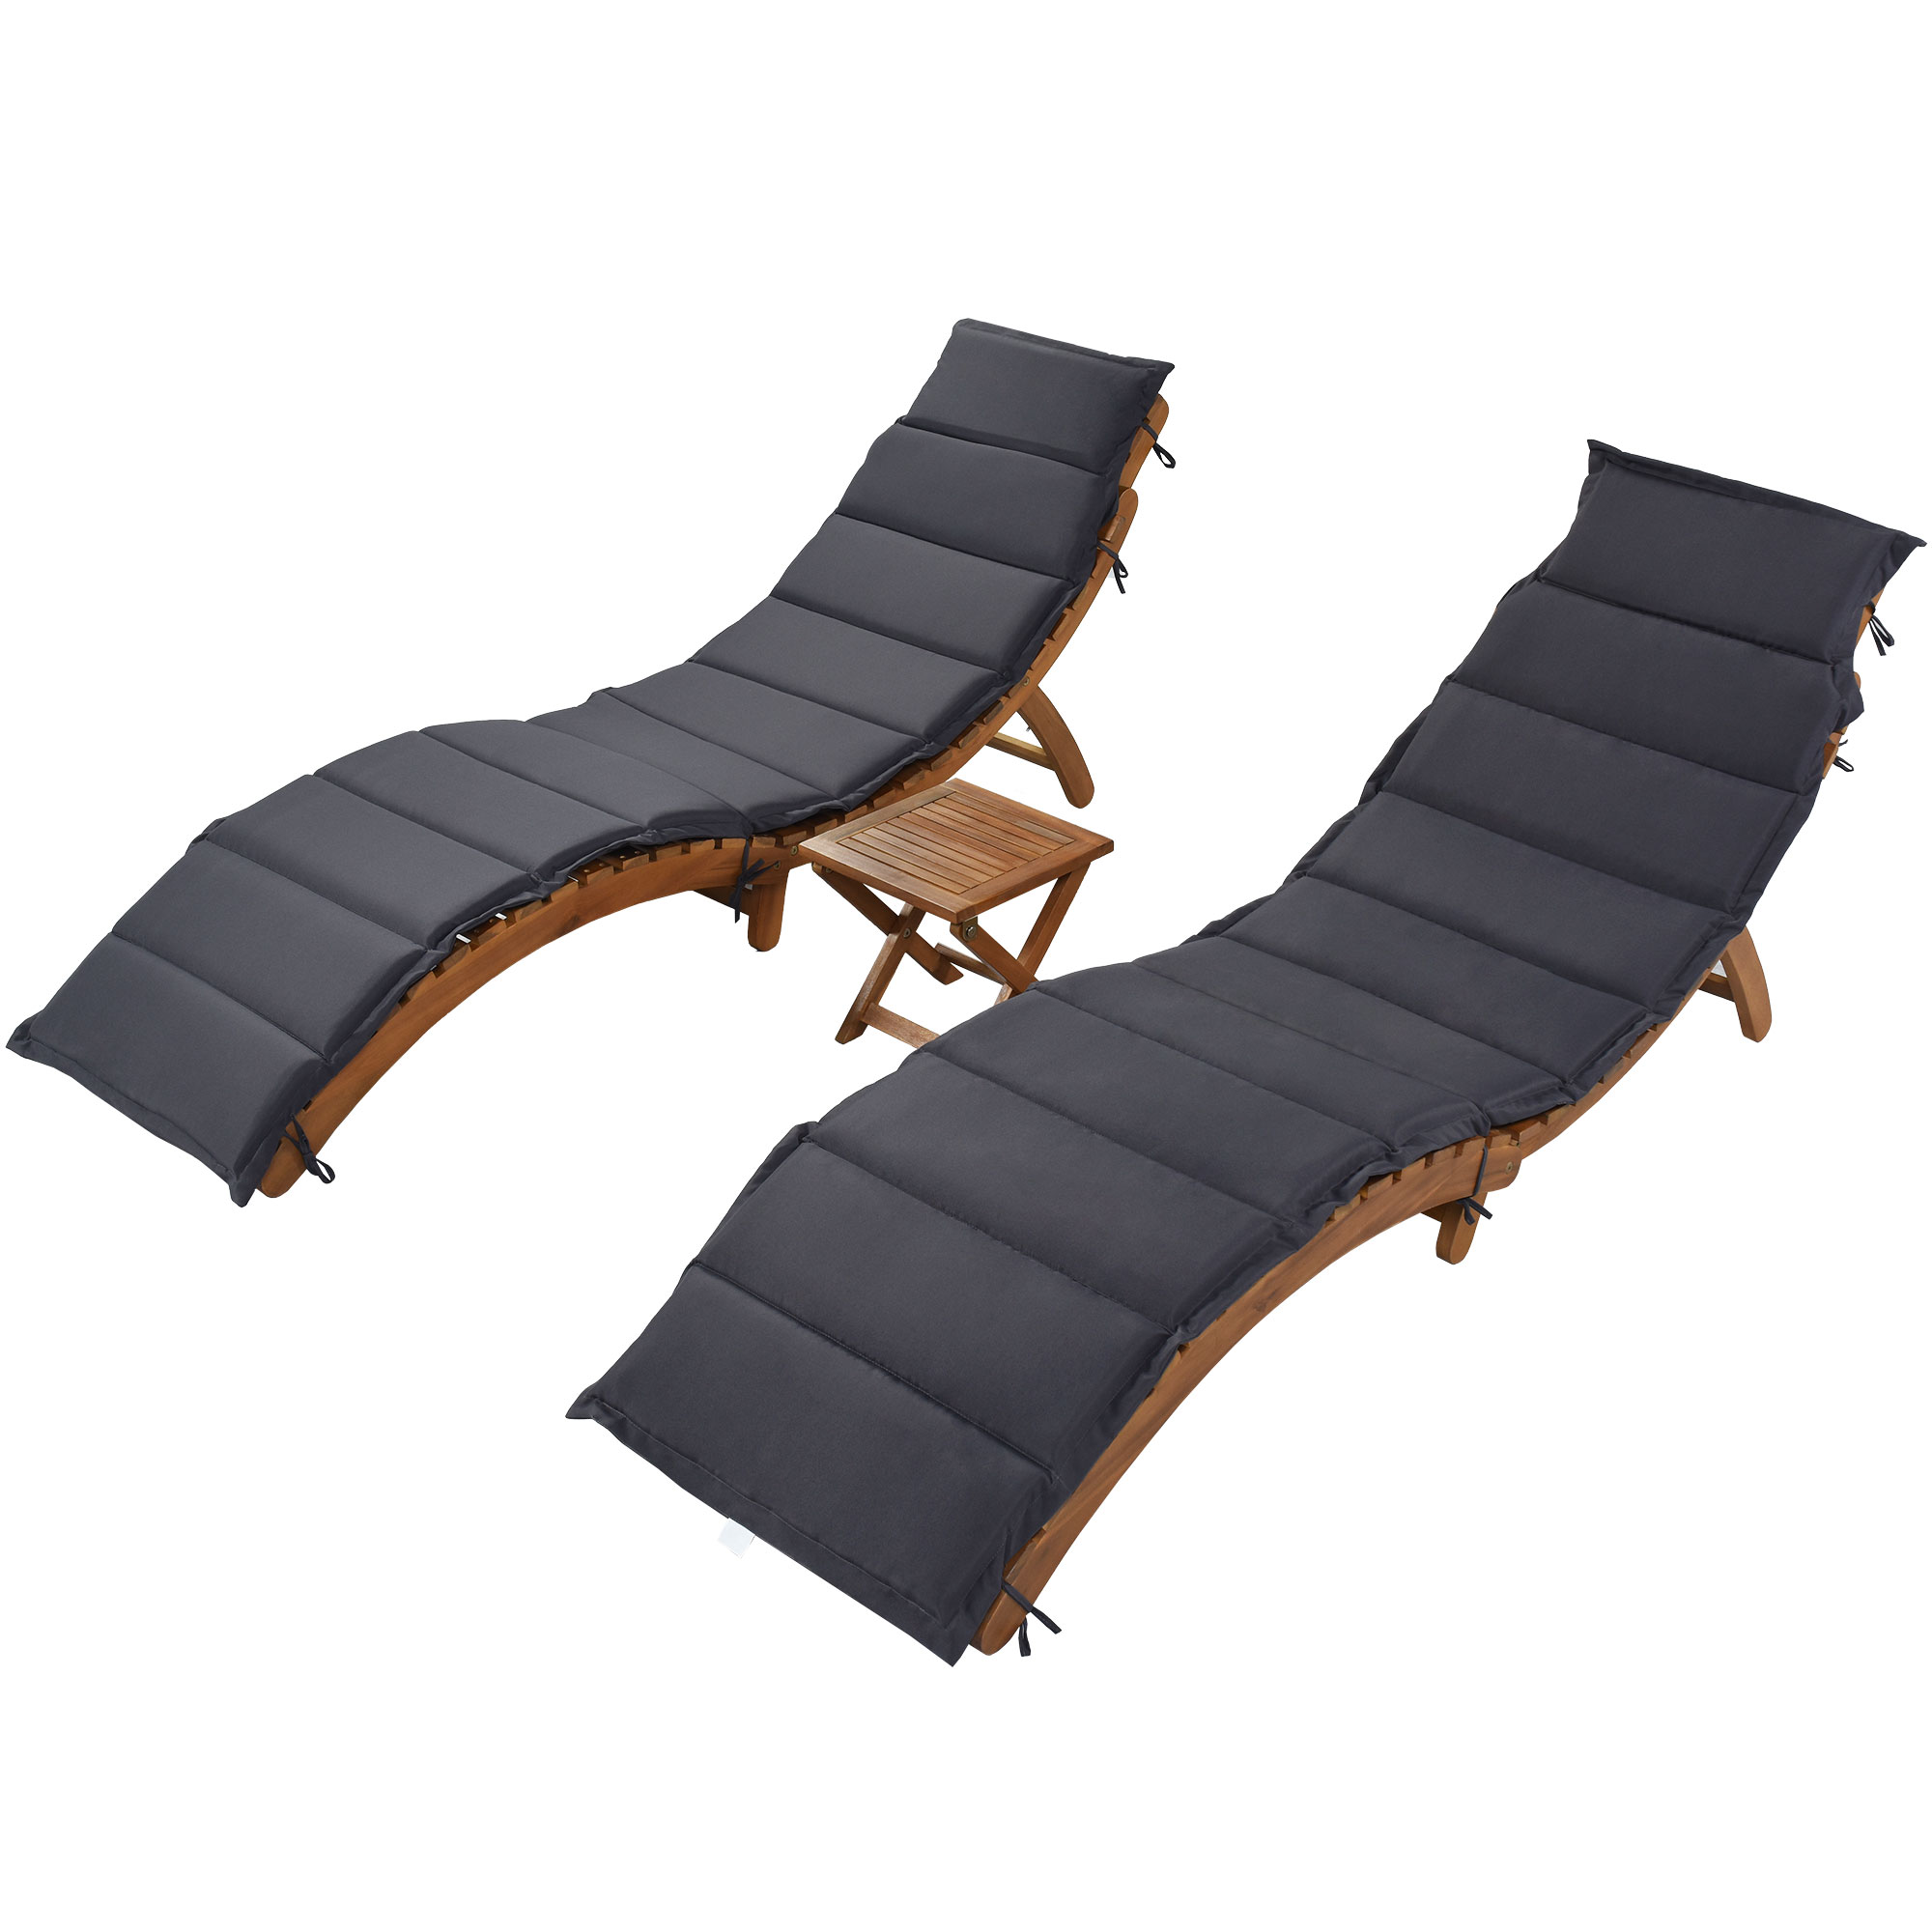 uhomepro 3-Piece Pool Furniture Folding Outdoor Chairs, Patio Chaise Loungers, Chaise Lounge Chair Outdoor Set for Backyard Garden, Couch Cushioned Recliner Chair with Foldable Tea Table - image 4 of 13